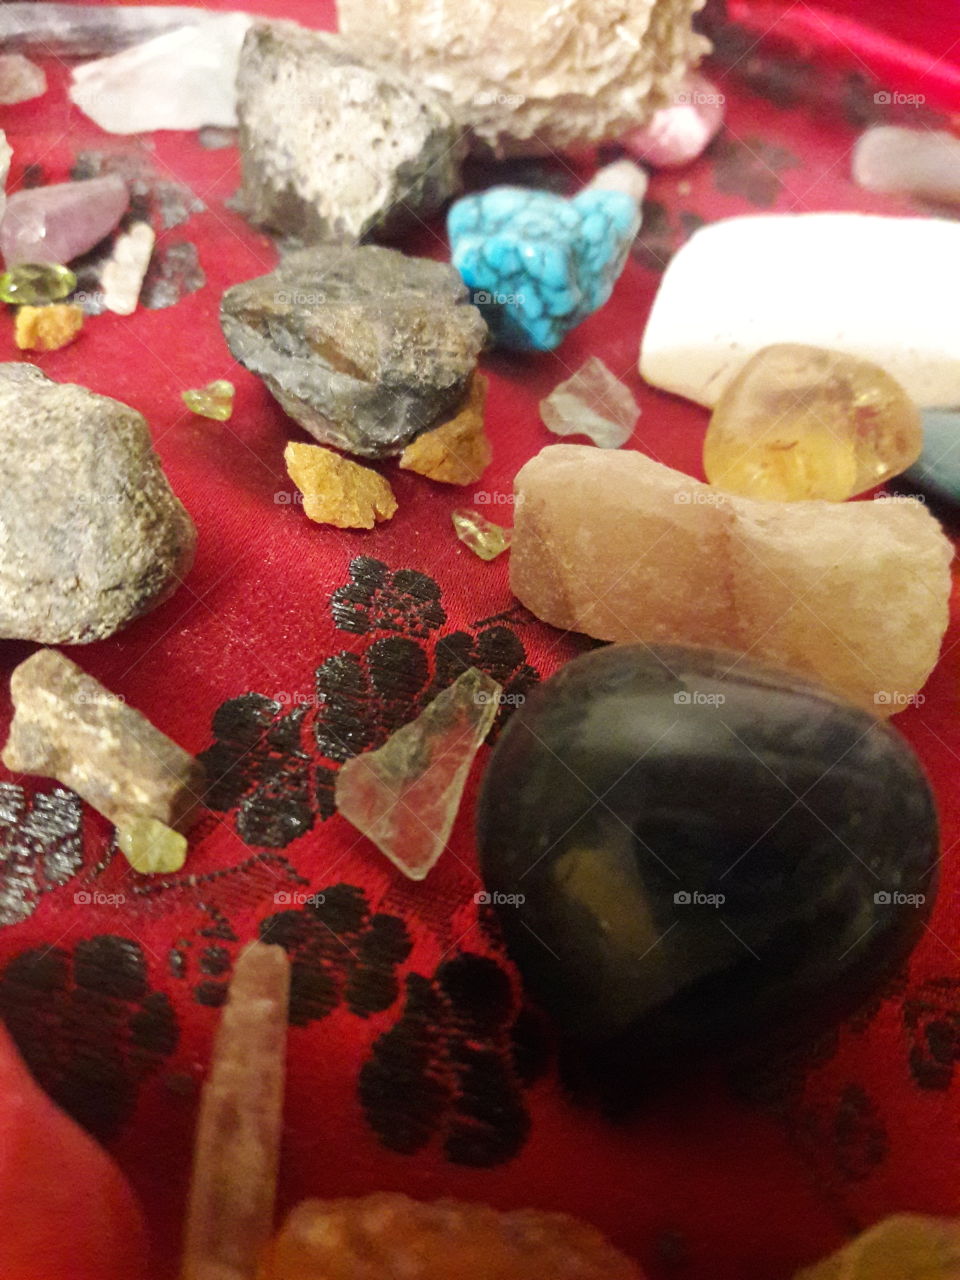 My personal assortment of rocks, gemstones, and shells.